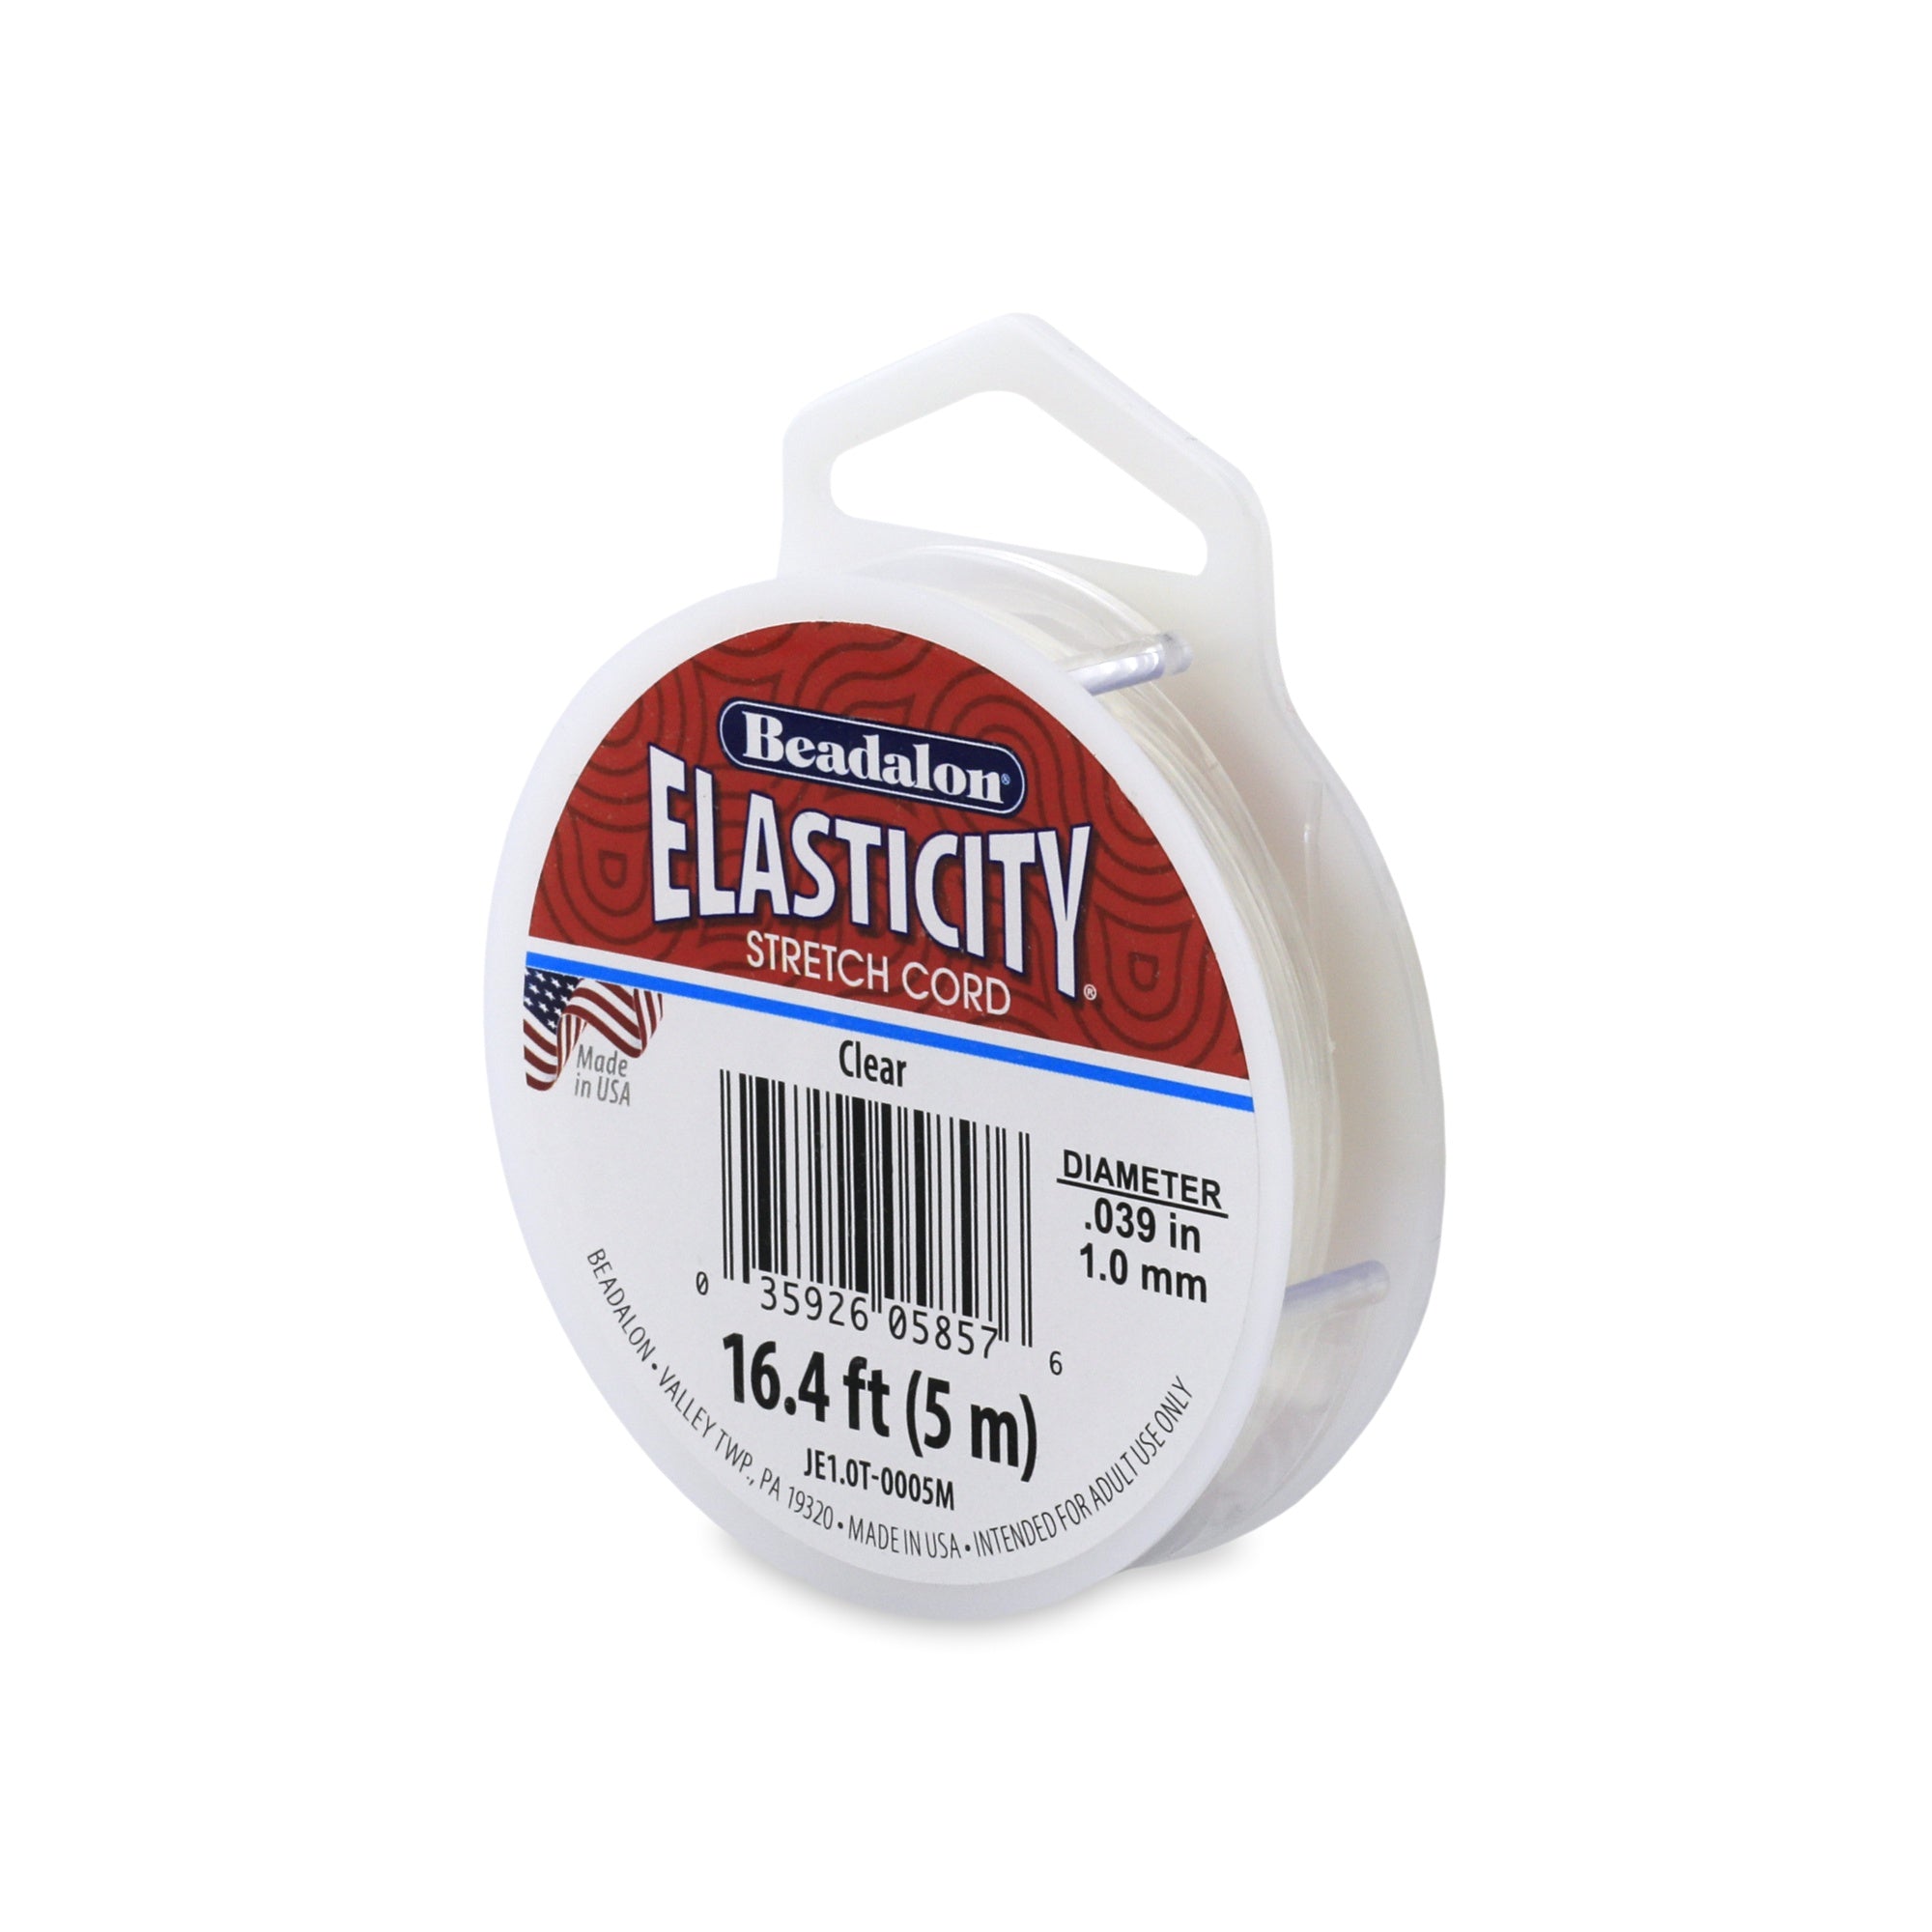 Elasticity Stretch Cord, 1.0 mm / .039 in, Clear, 5 meter